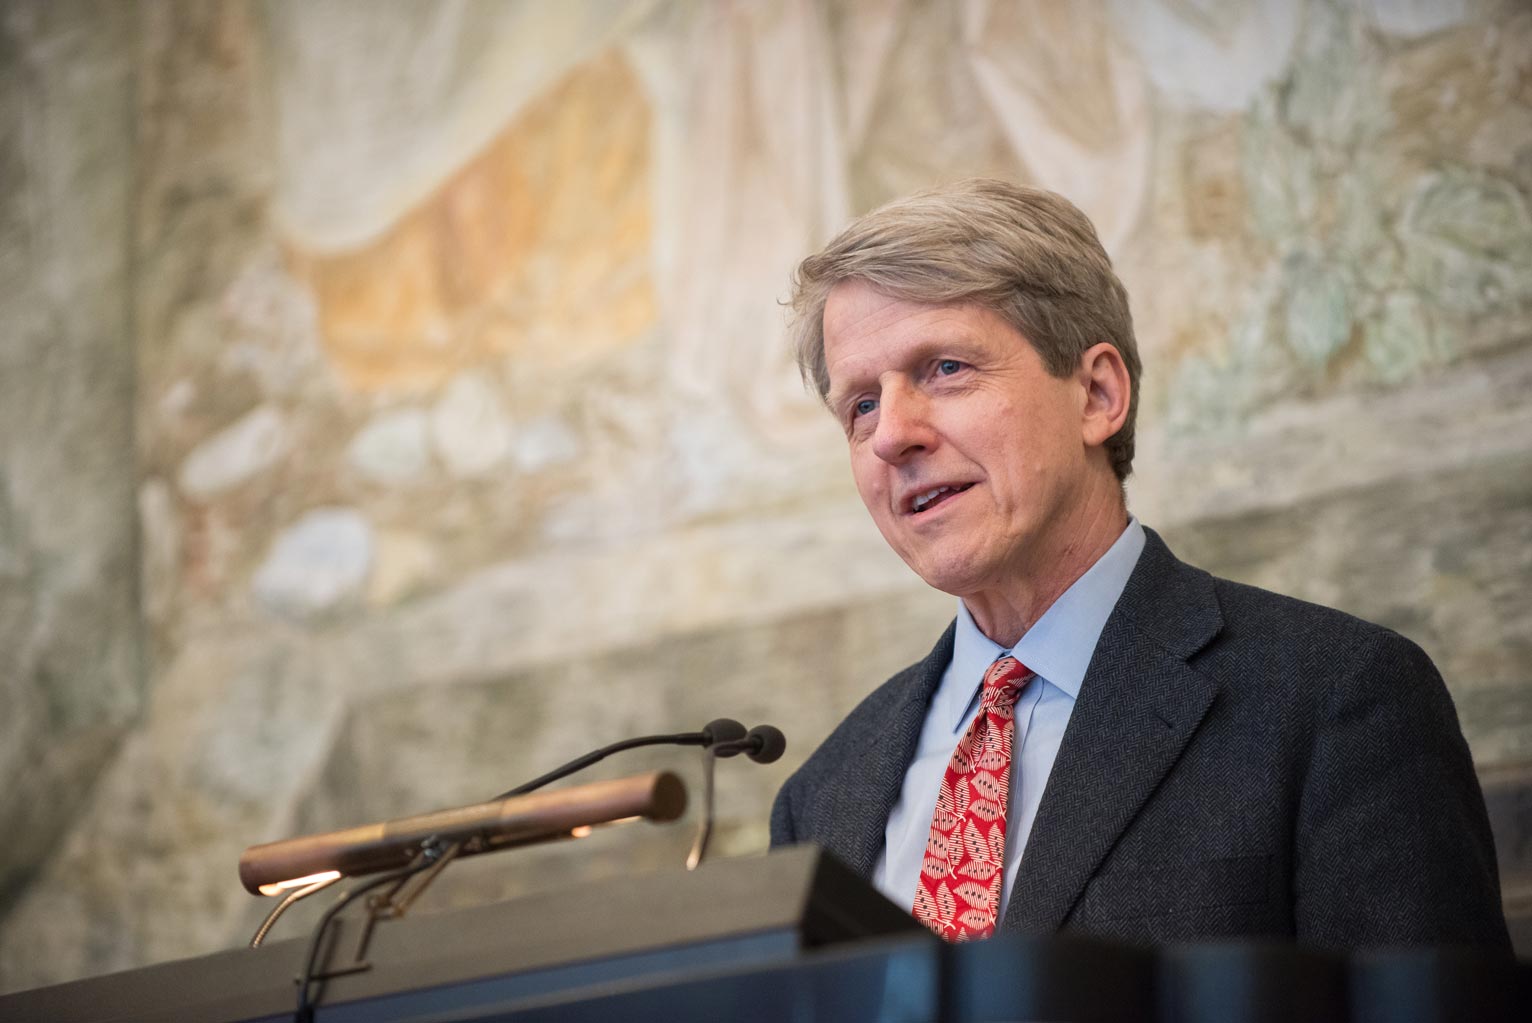 Nobel laureate Robert Shiller honors the 'unsung heroes' fighting against market abuse and therefore for a smoothly functioning market economy.